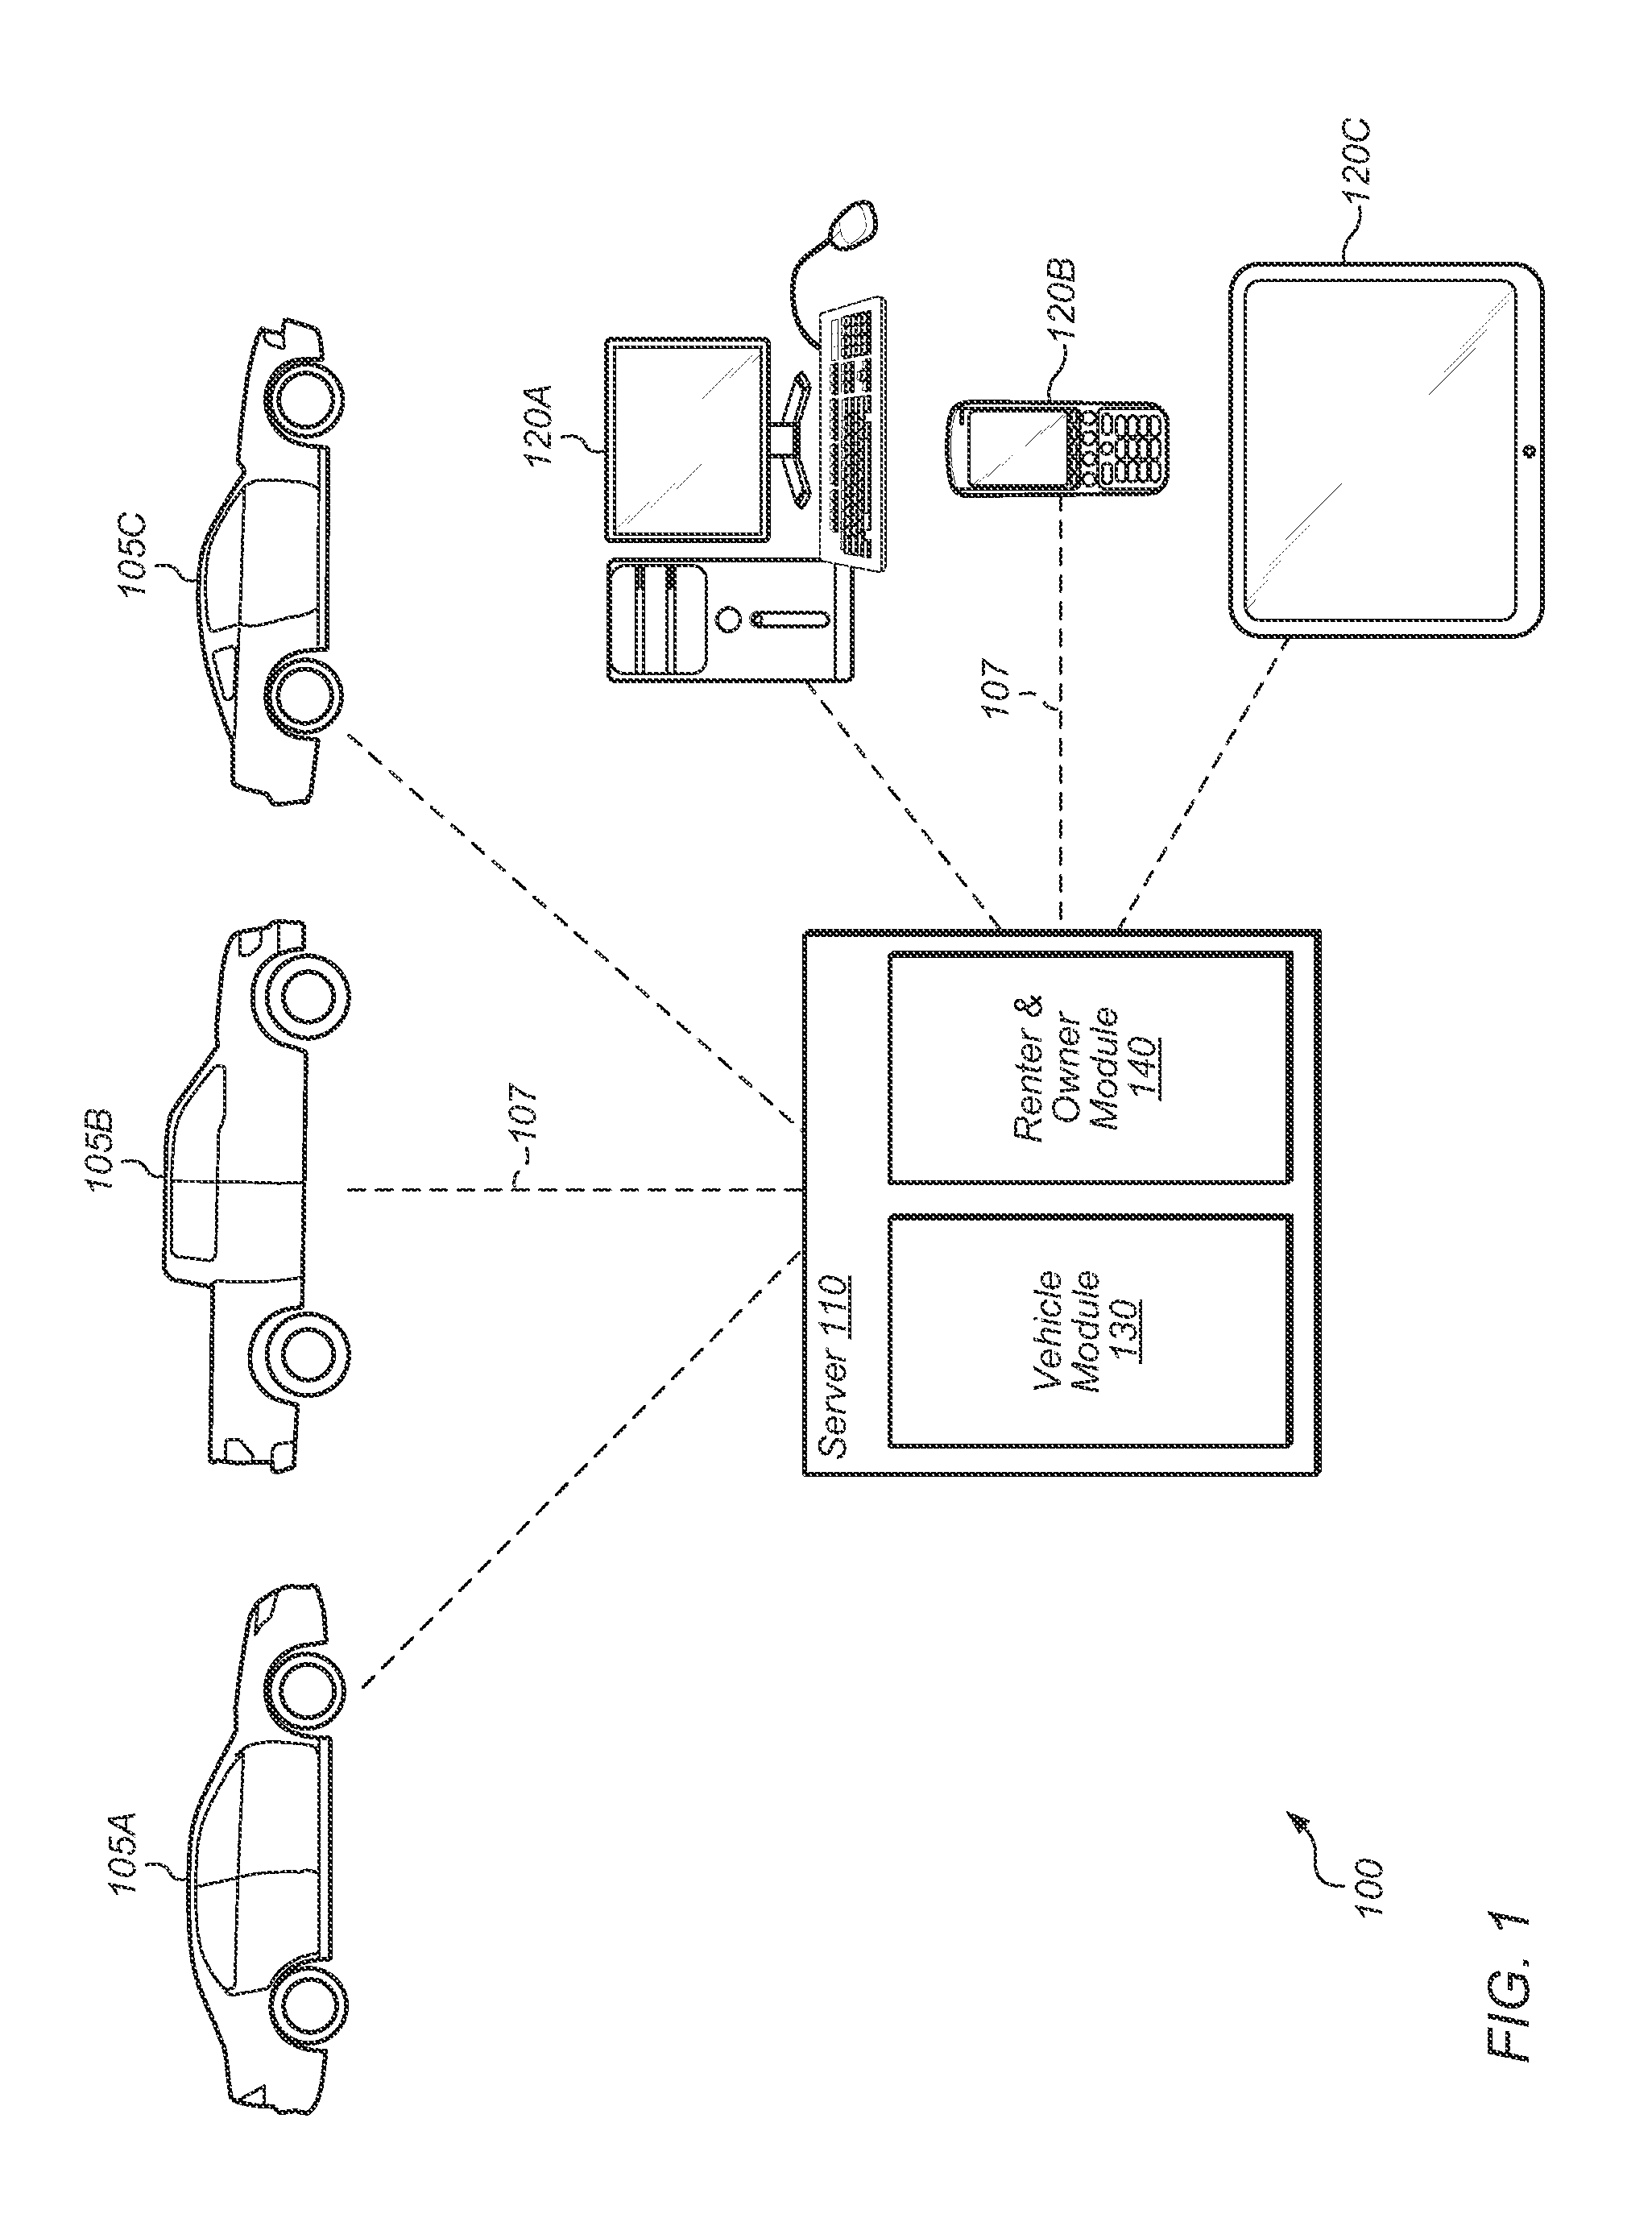 Shared vehicle rental system including vehicle availability determination